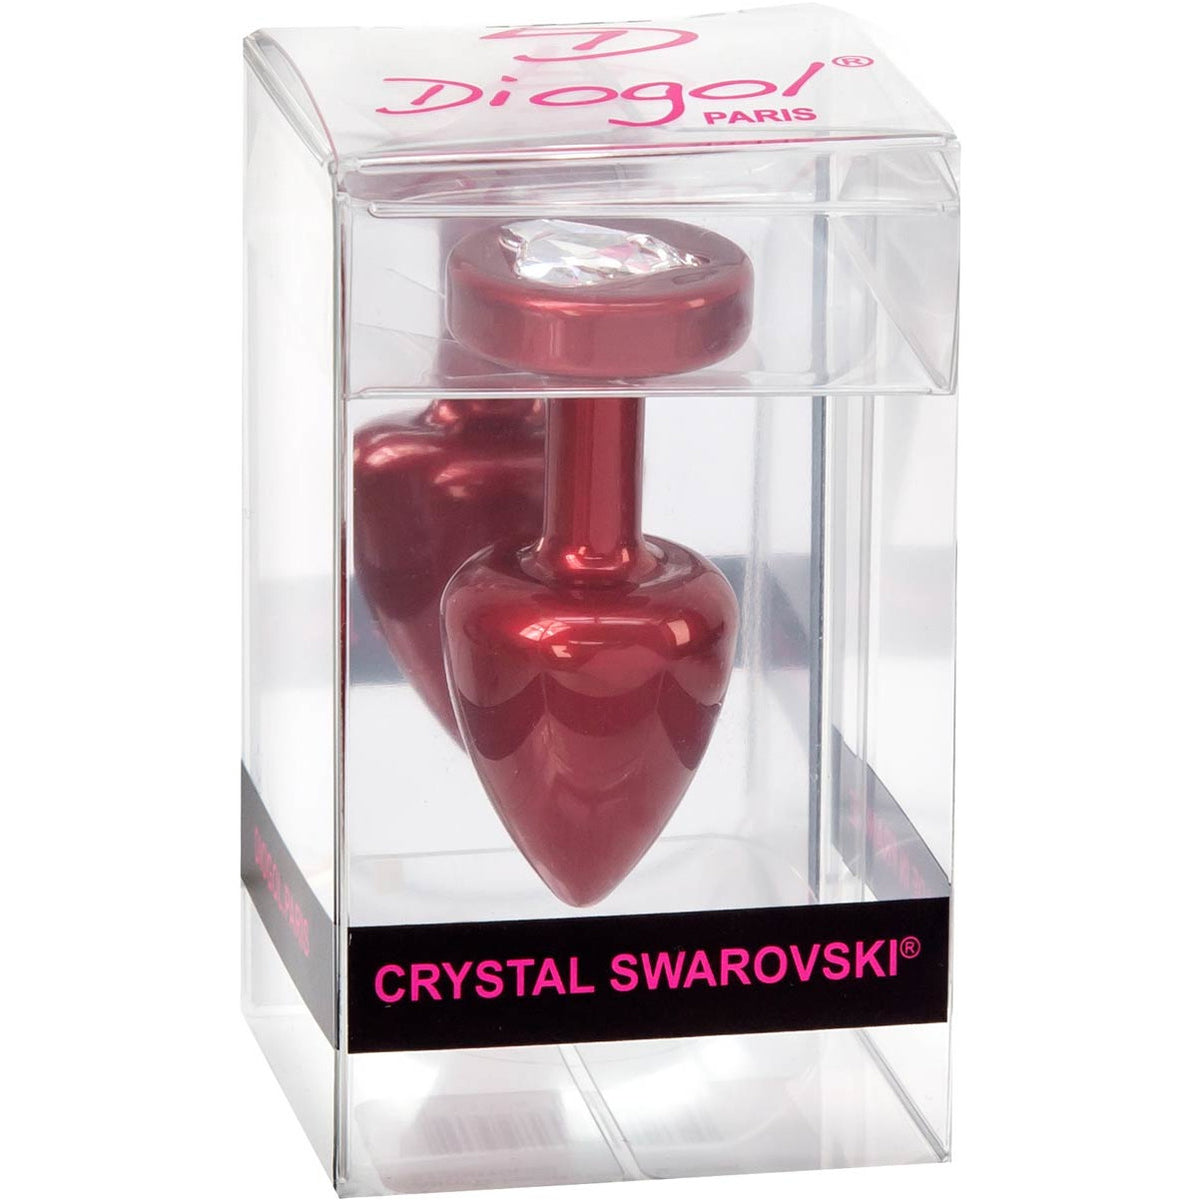 Diogol Anni Red Heart Butt Plug with Swarovski Elements (T1 Size)